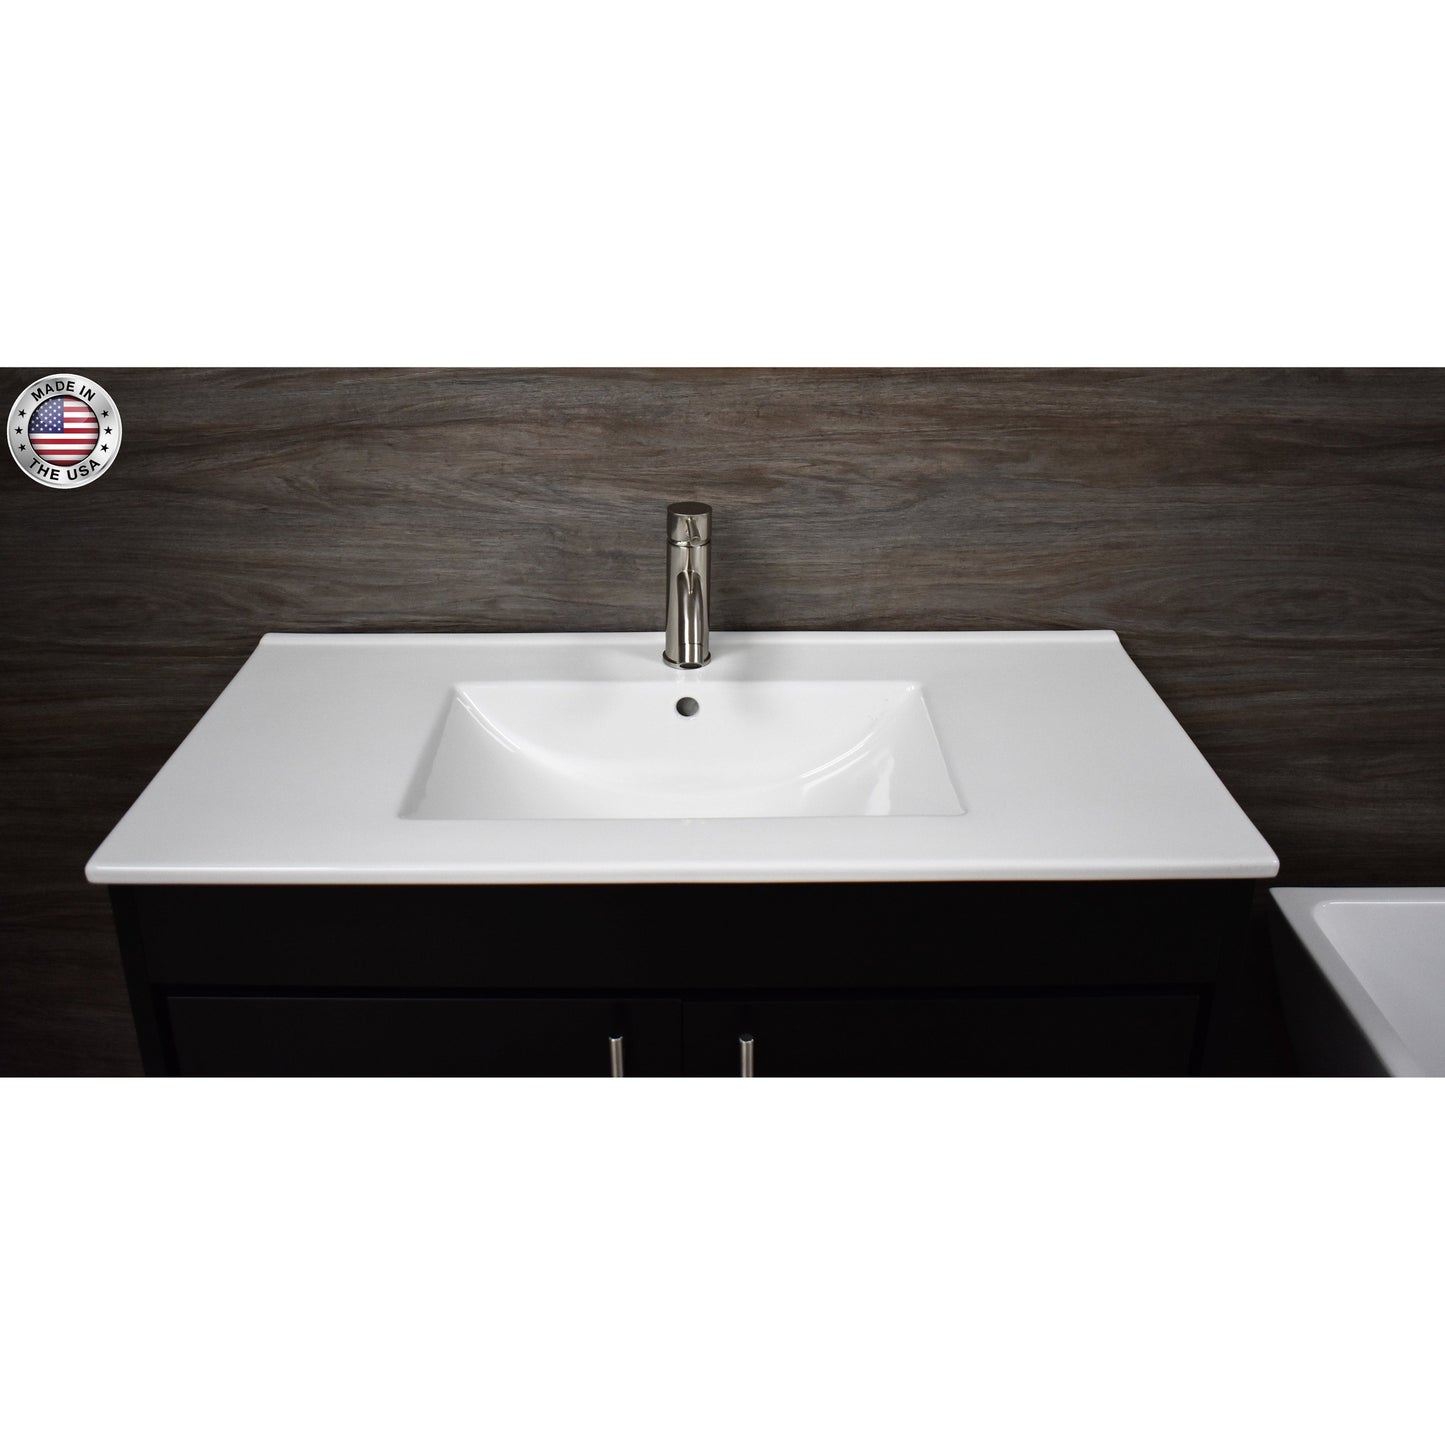 Volpa USA Villa 36" Black Freestanding Modern Bathroom Vanity With Integrated Ceramic Top and Brushed Nickel Round Handles